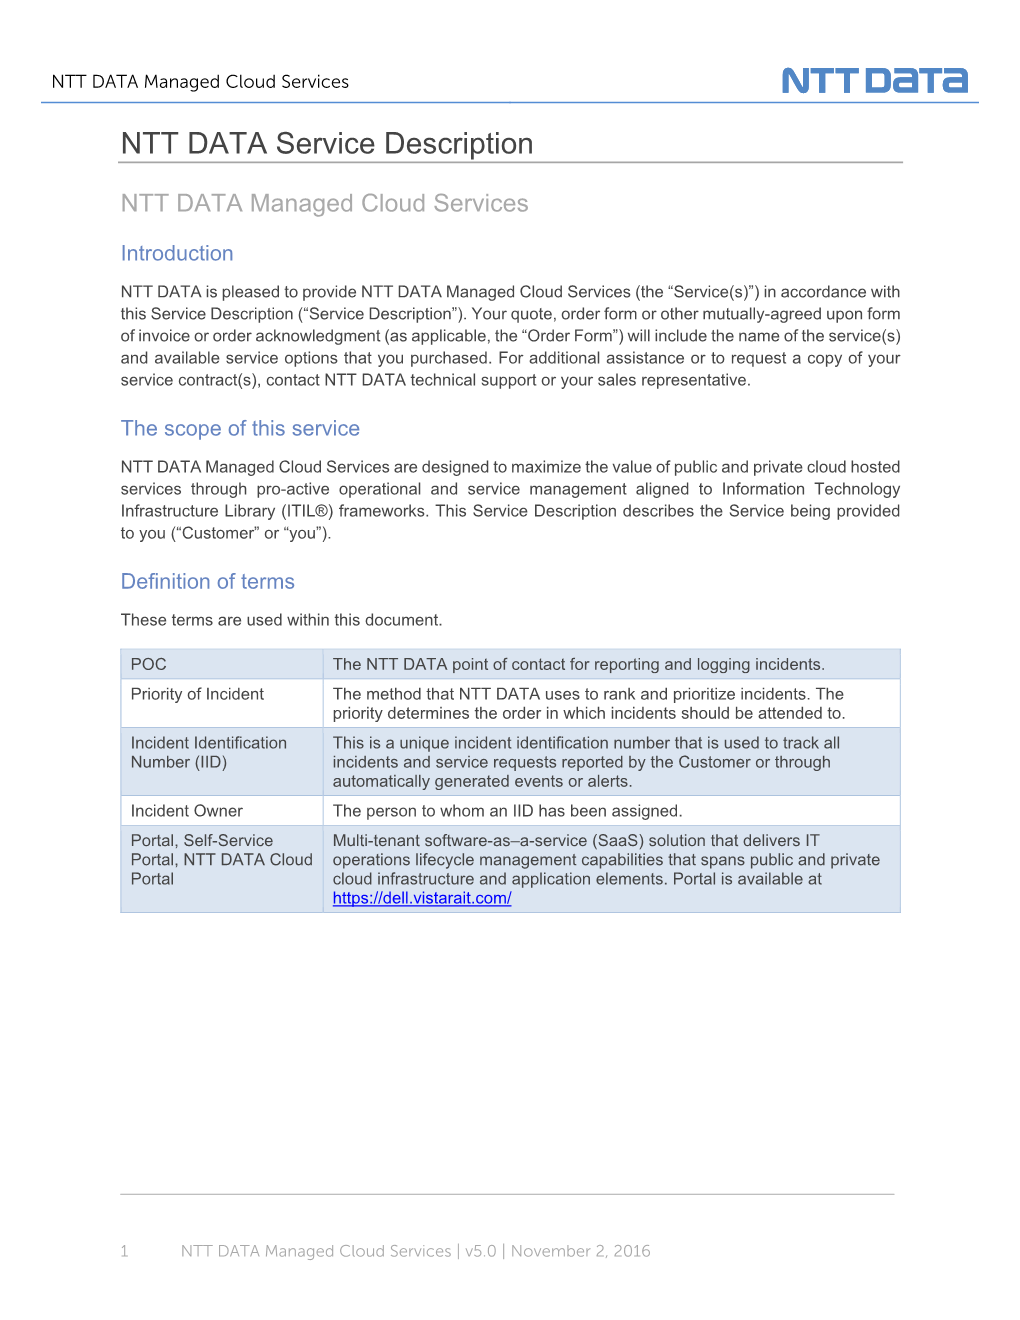 NTT DATA Managed Cloud Services